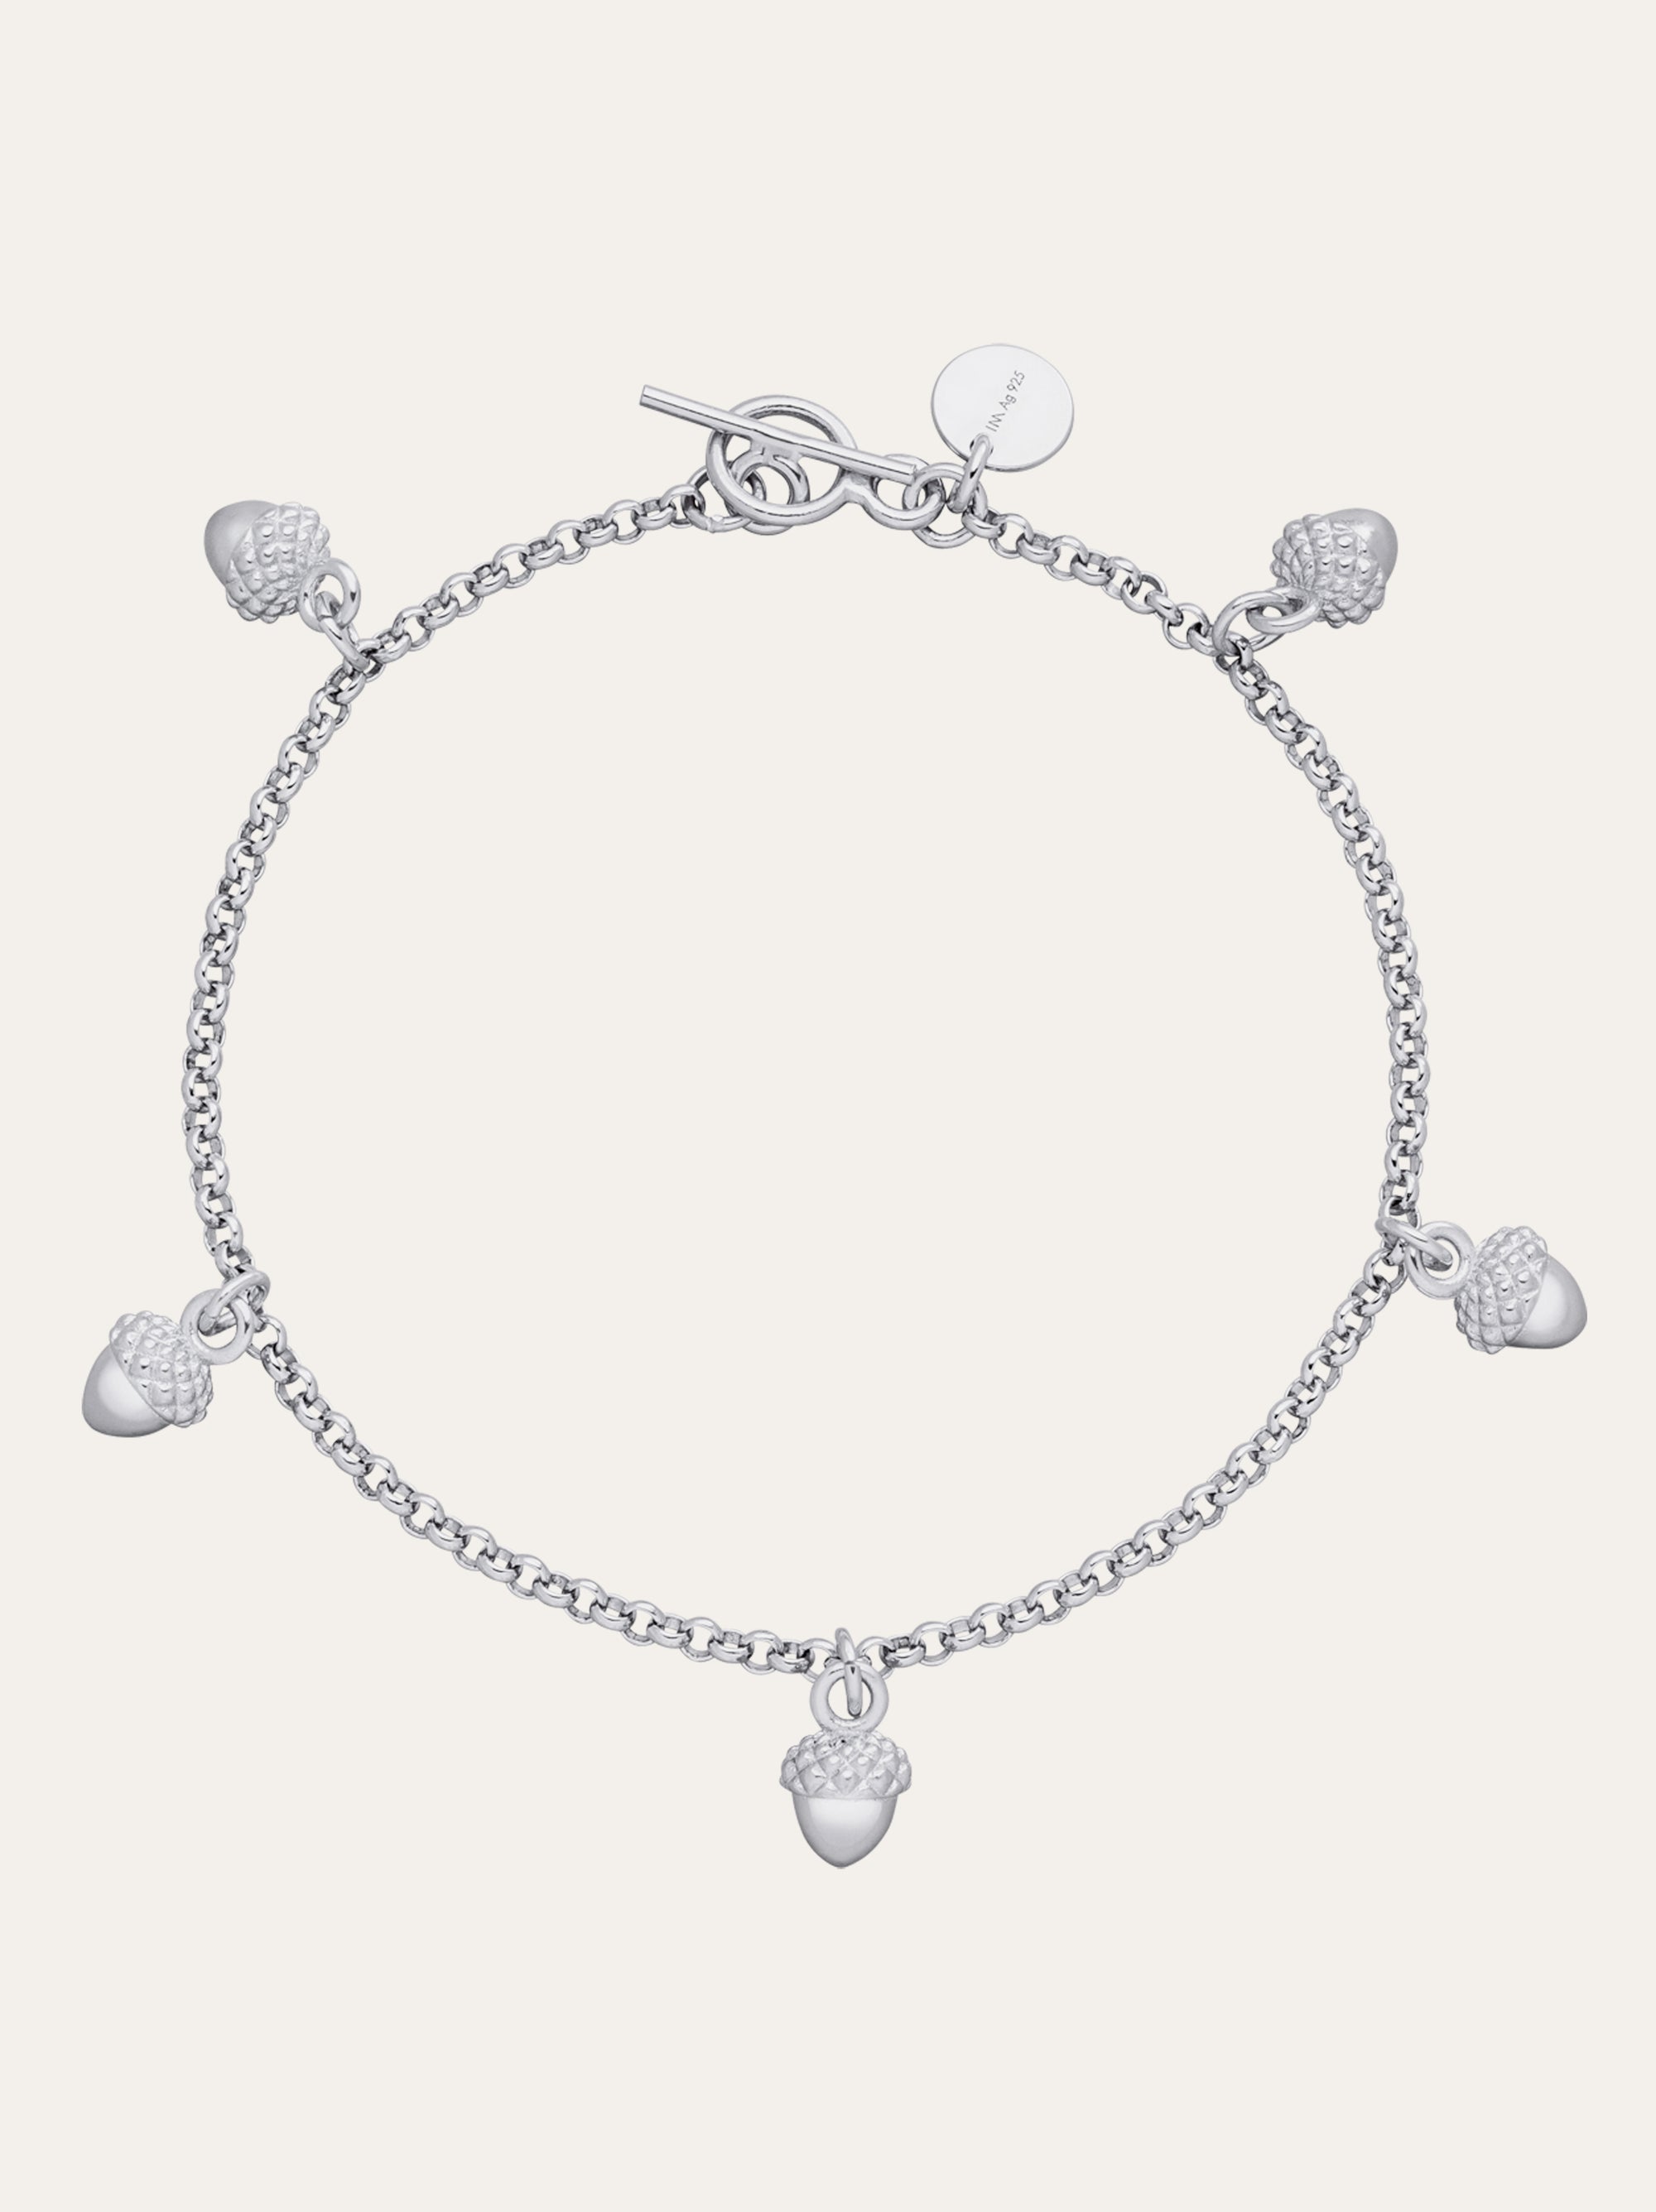 "Sterling Silver Acorn Charm Bracelet: 5 detailed charms on delicate chain. Lucky charm bracelet